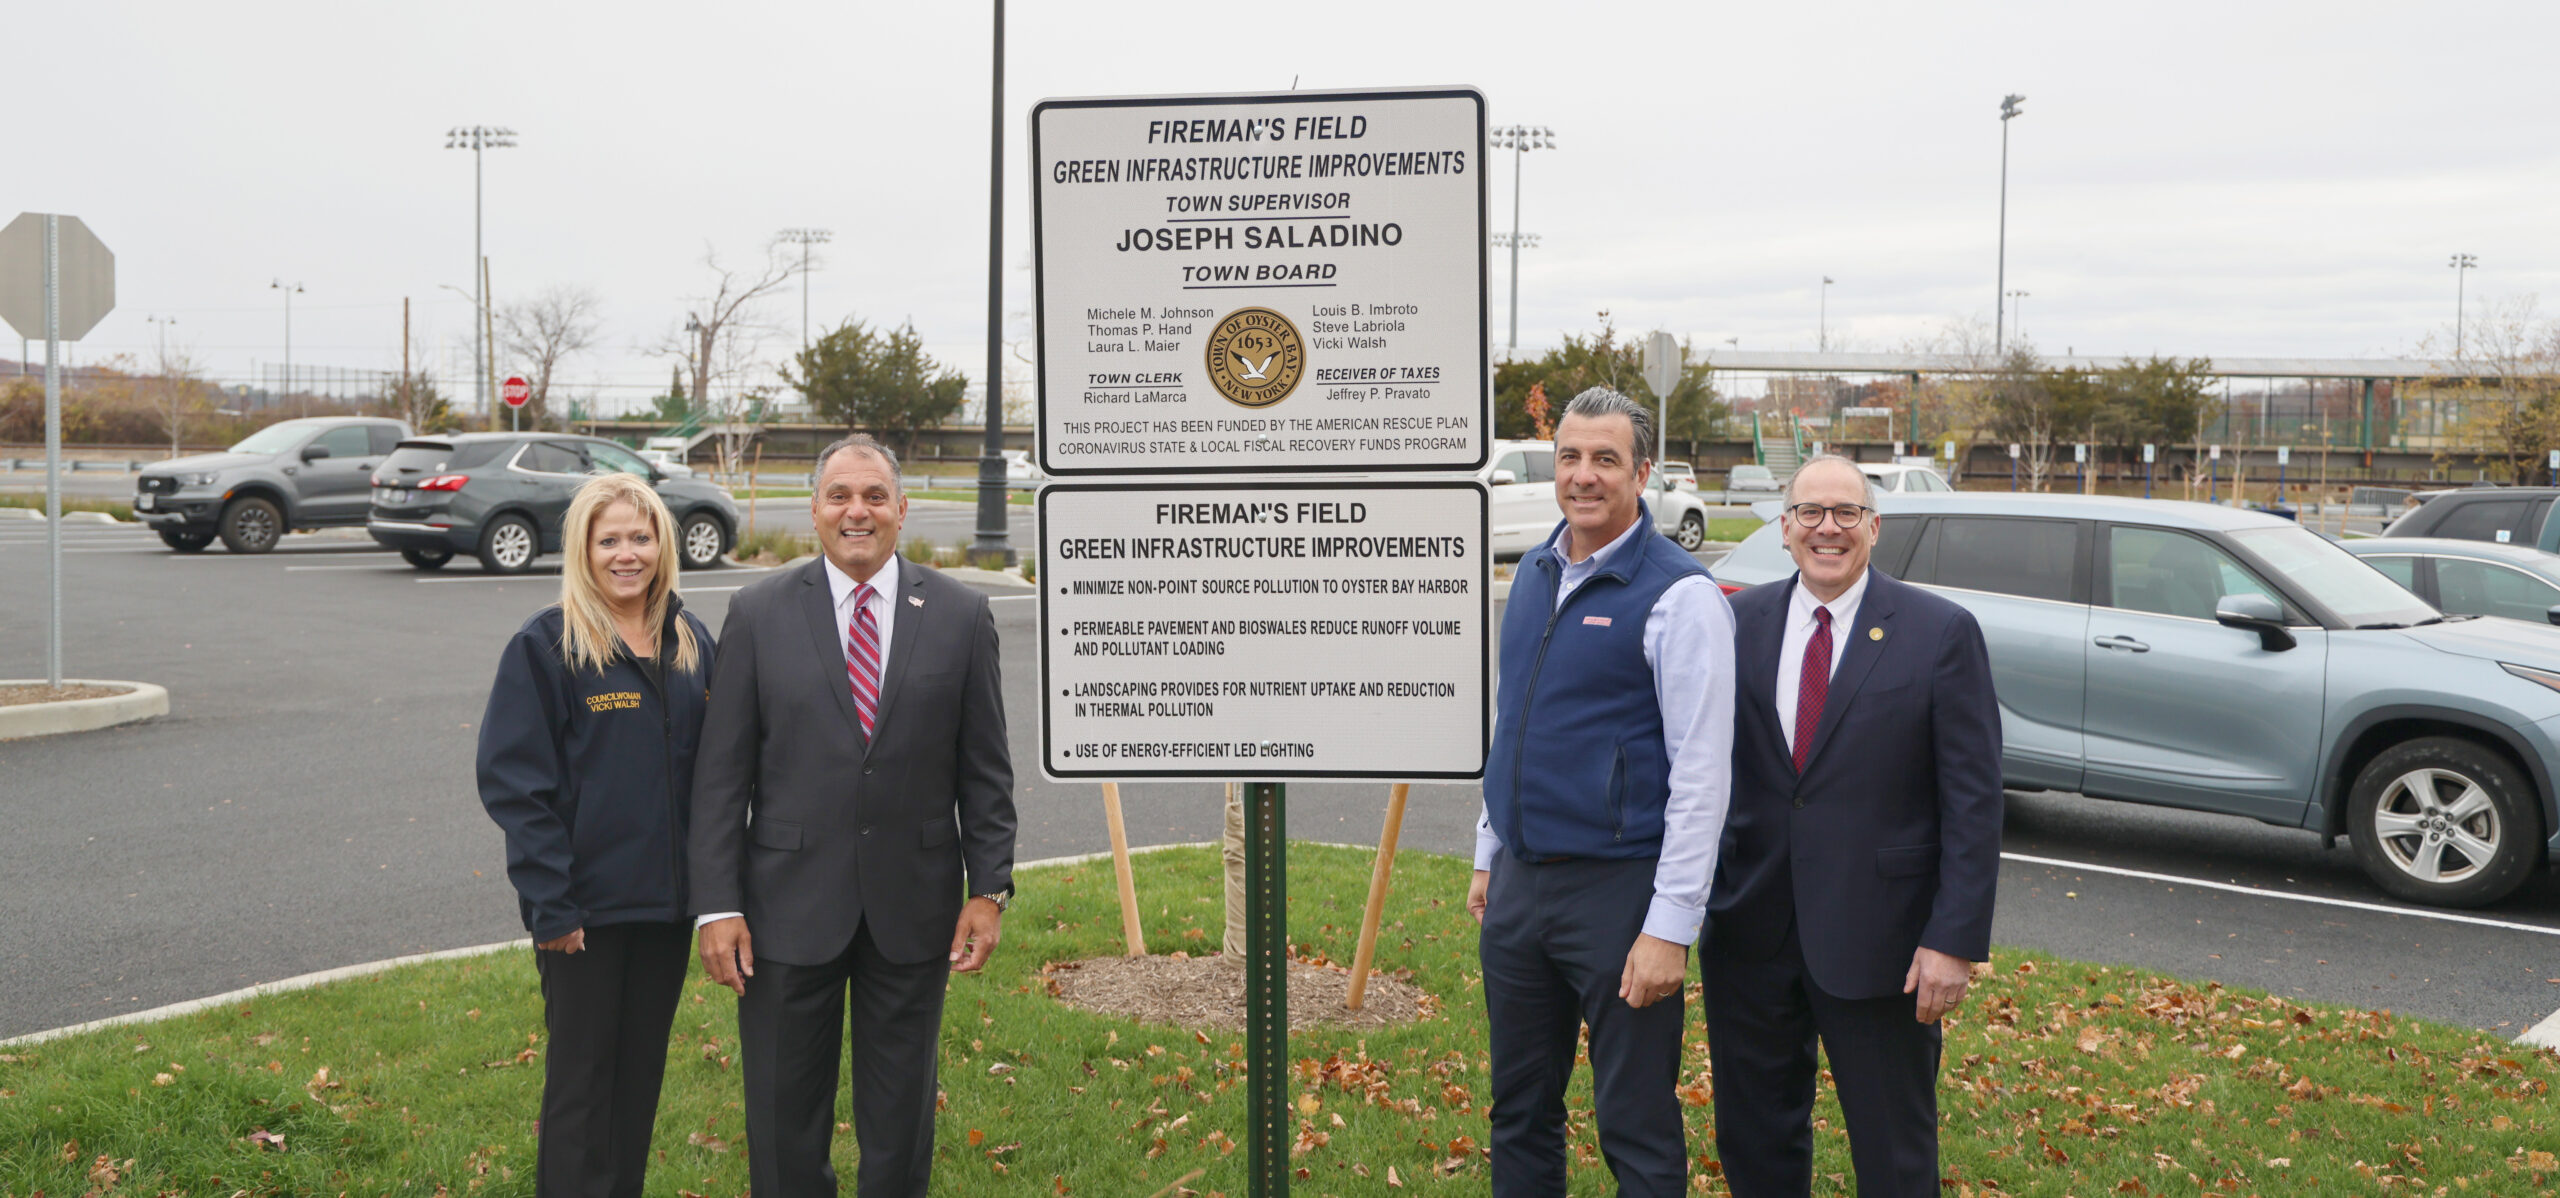 Field Upgrades Completed at Gaynor Park in Glen Head – Town of Oyster Bay